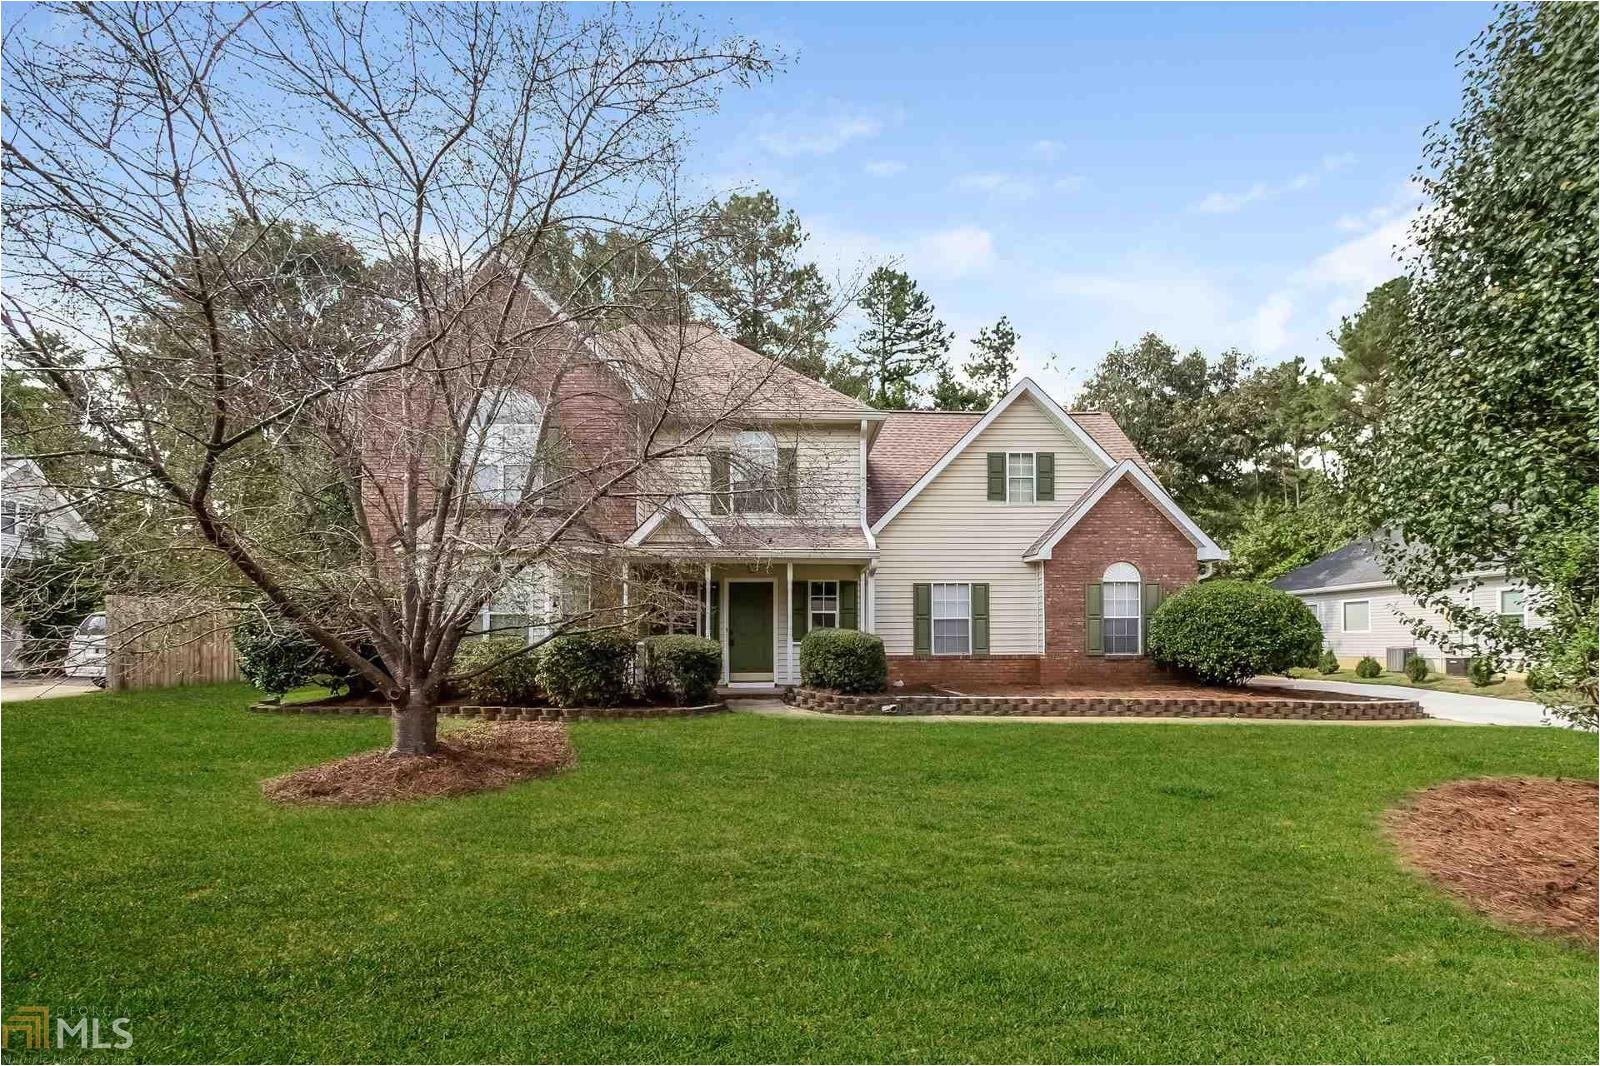 local real estate open houses for sale peachtree city ga coldwell banker